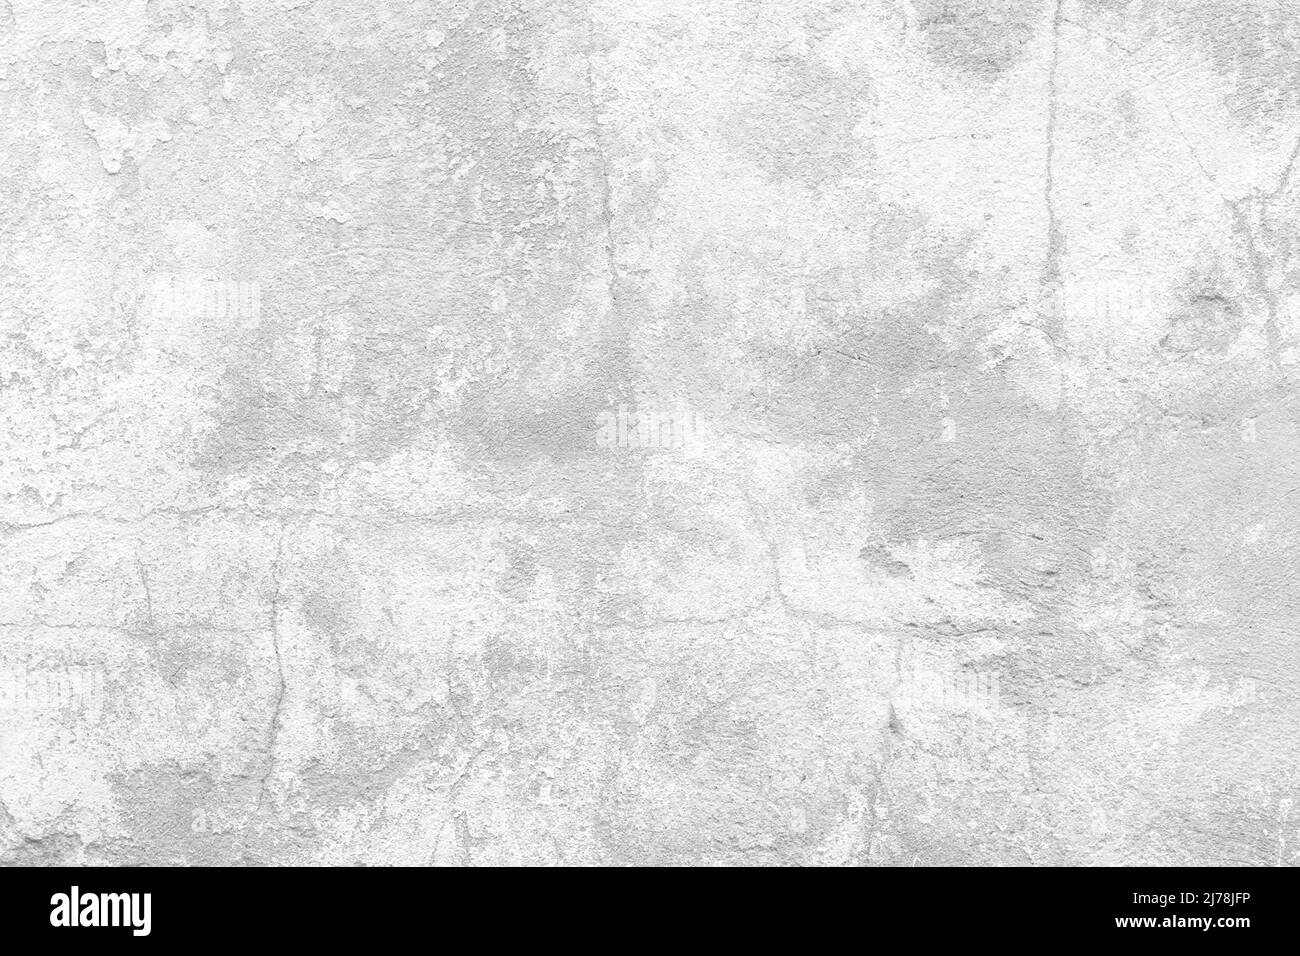 Cement wall surface, abstract light gray background. Concrete grunge ...